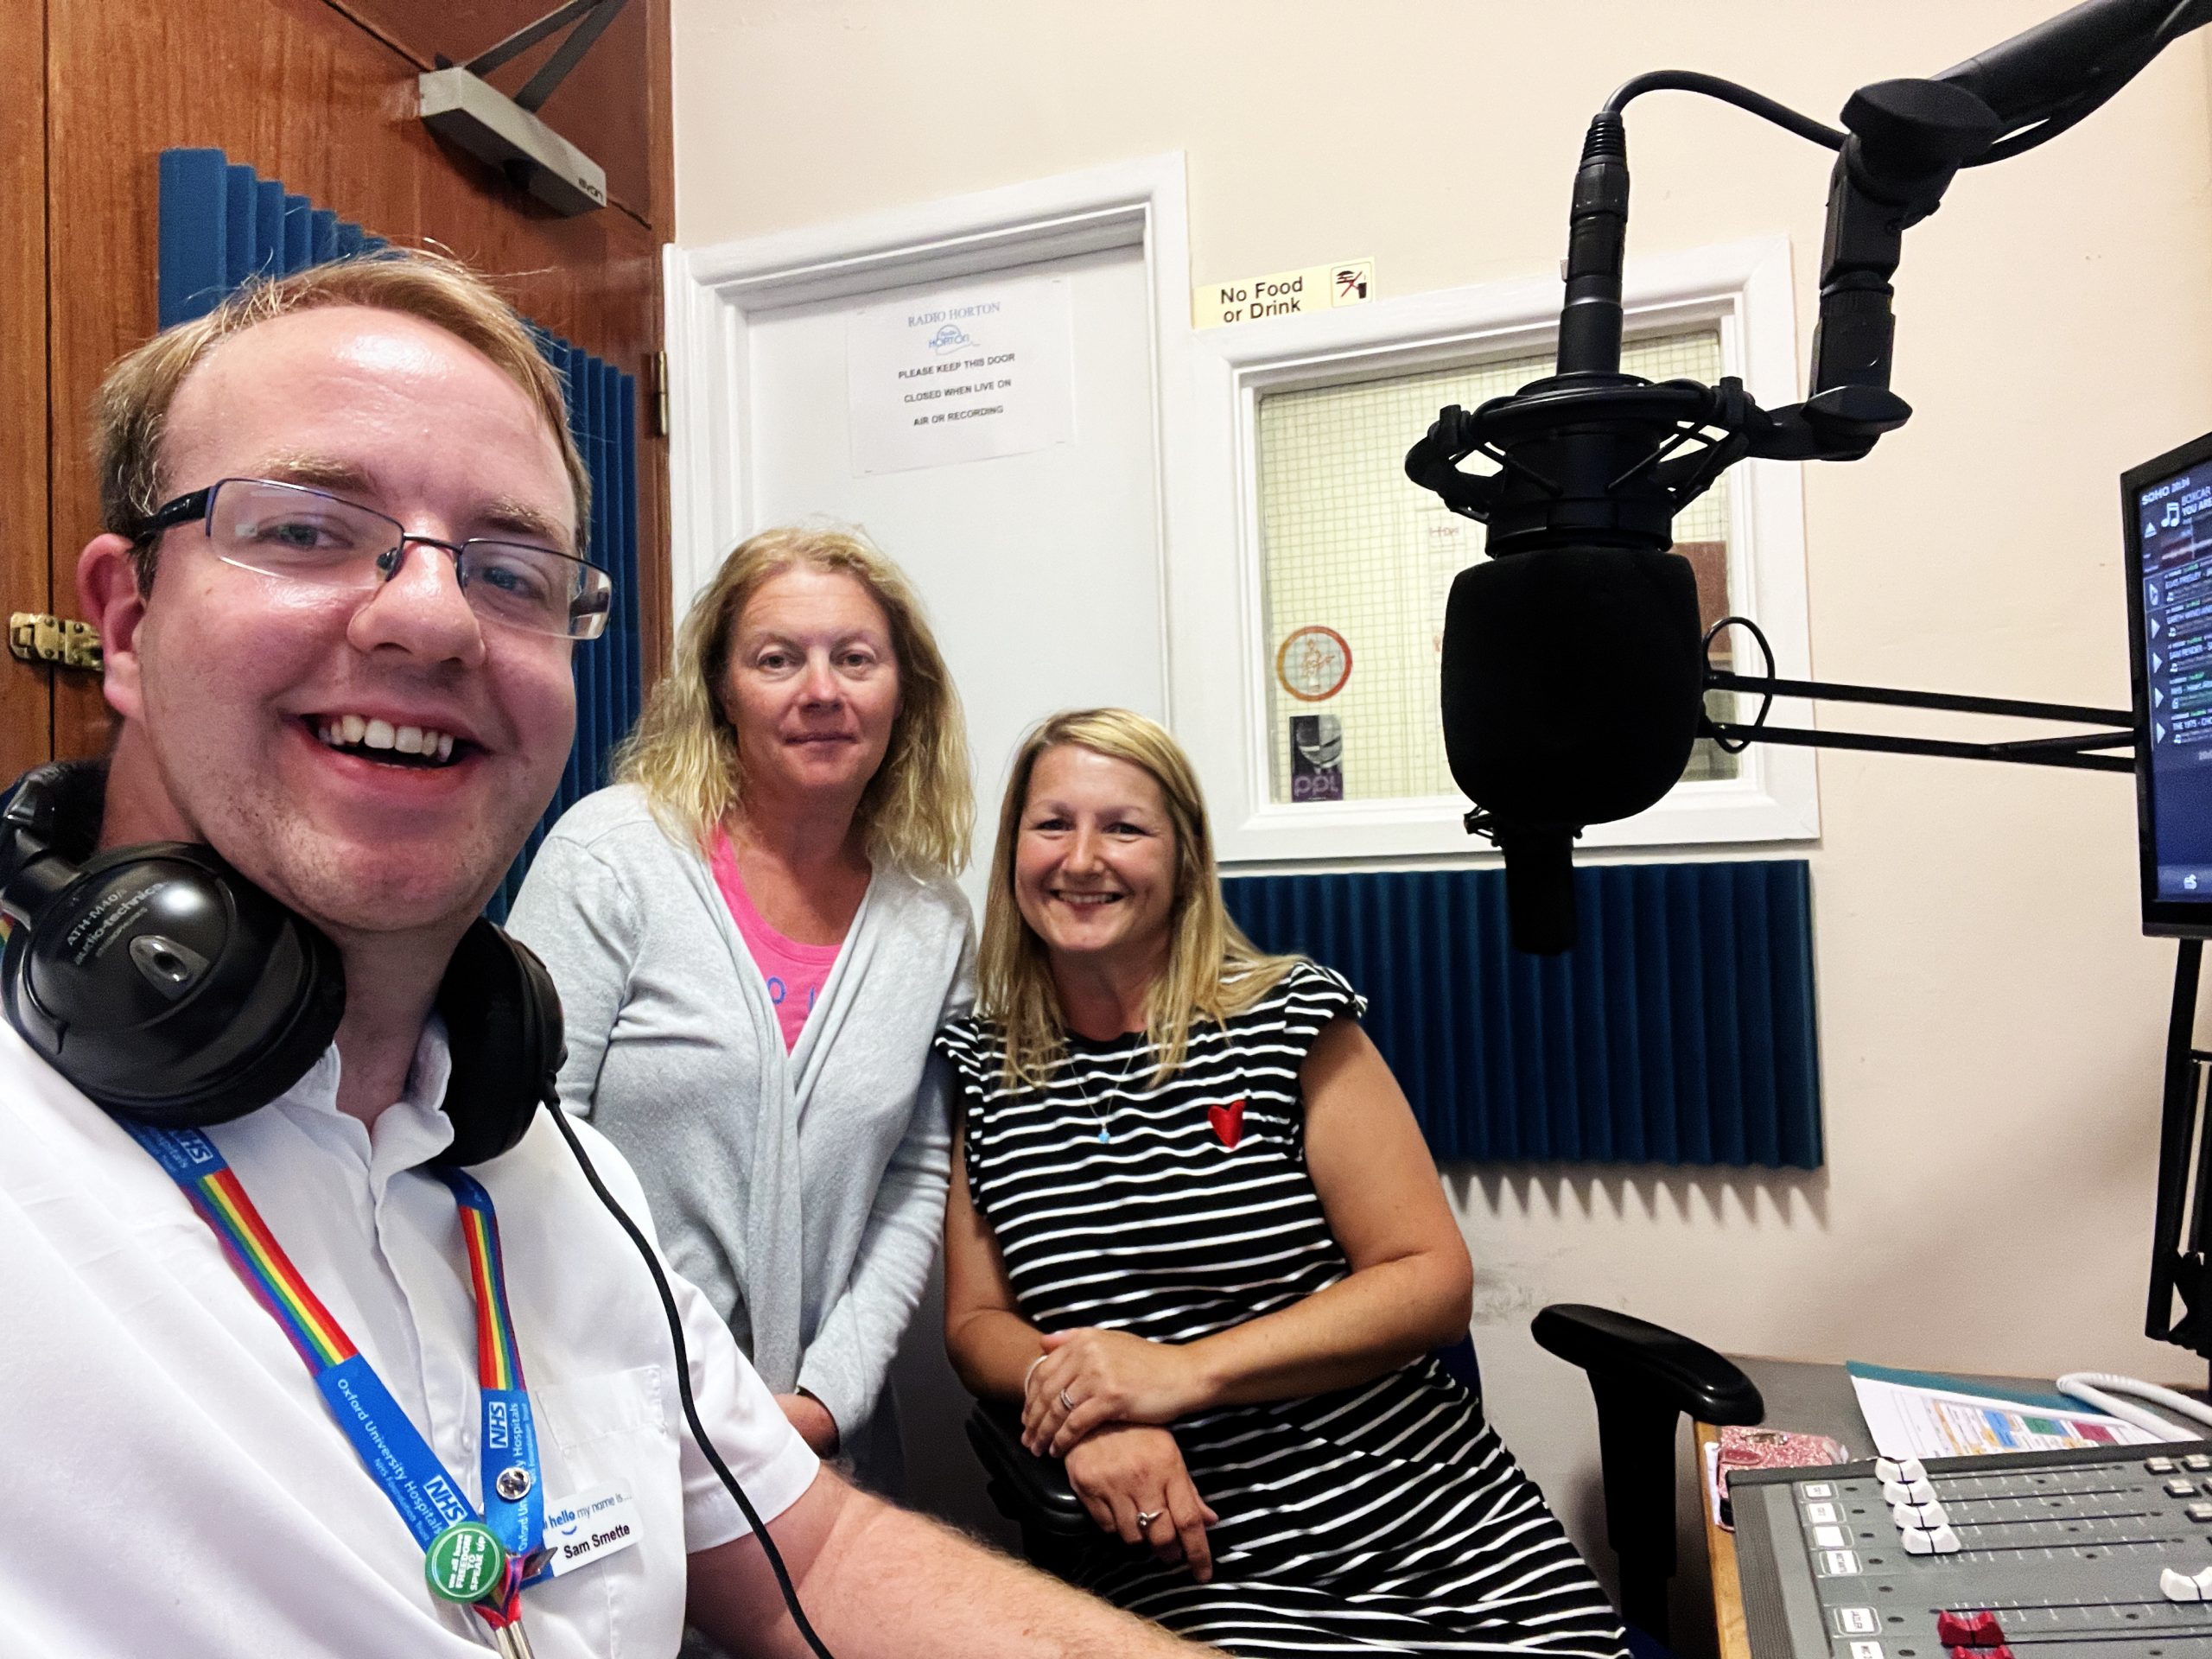 Leigh and Marie from the Oxfordshire Foster Care Association, speaking to Sam about foster caring in Oxfordshire.